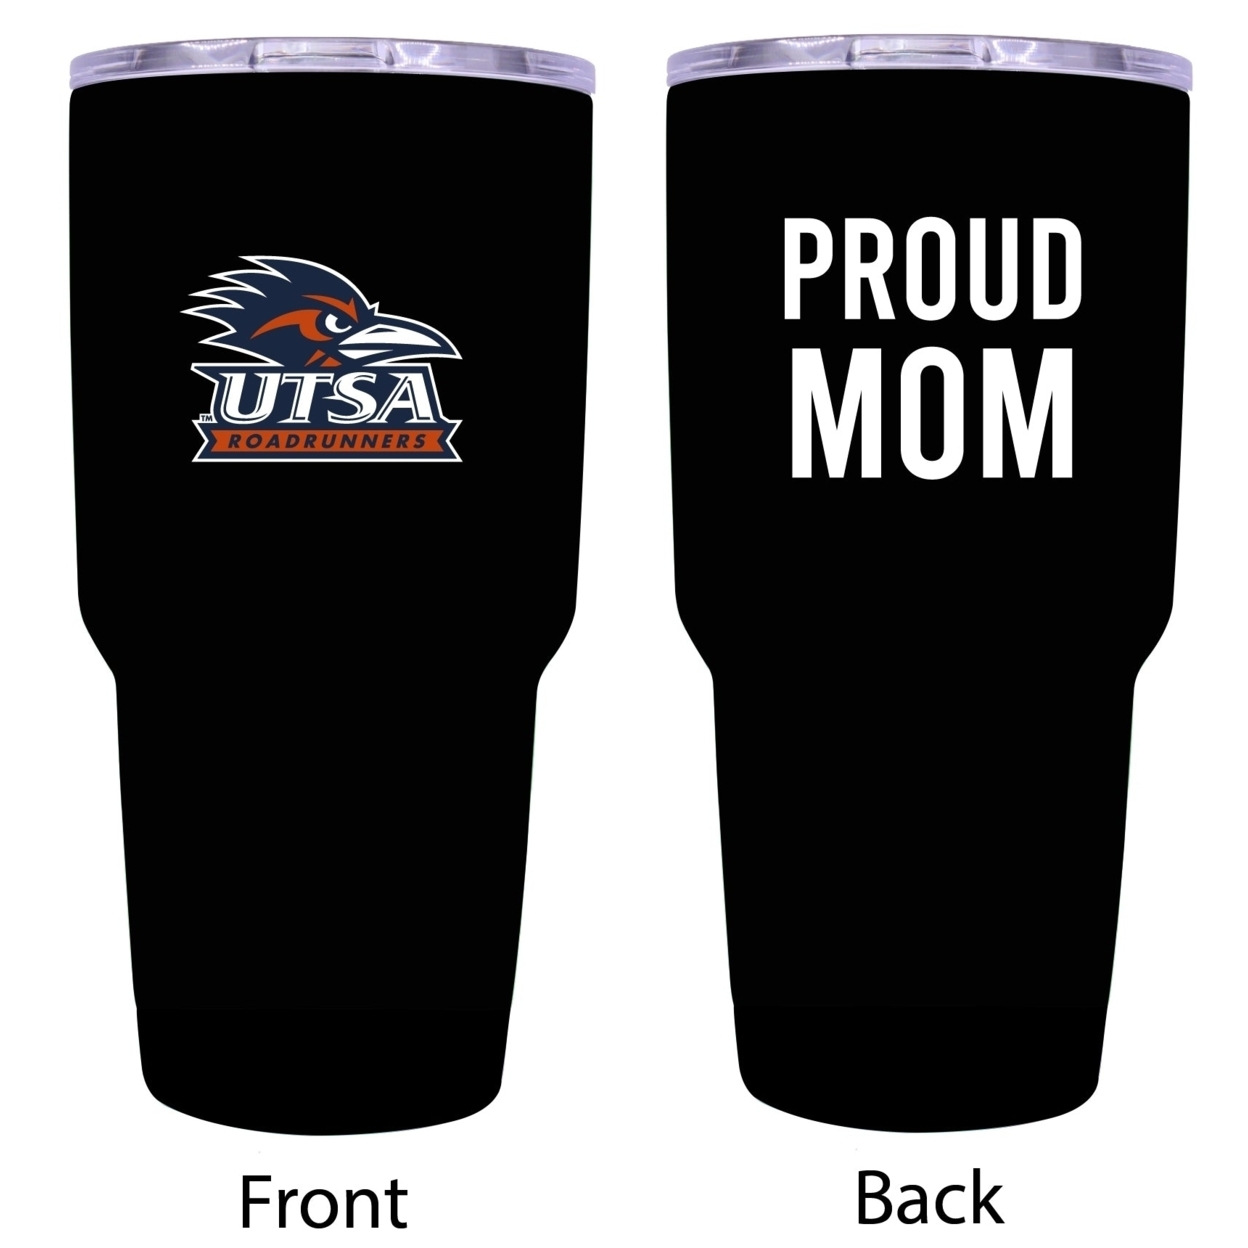 R And R Imports UTSA Road Runners Proud Mom 24 Oz Insulated Stainless Steel Tumblers Black.